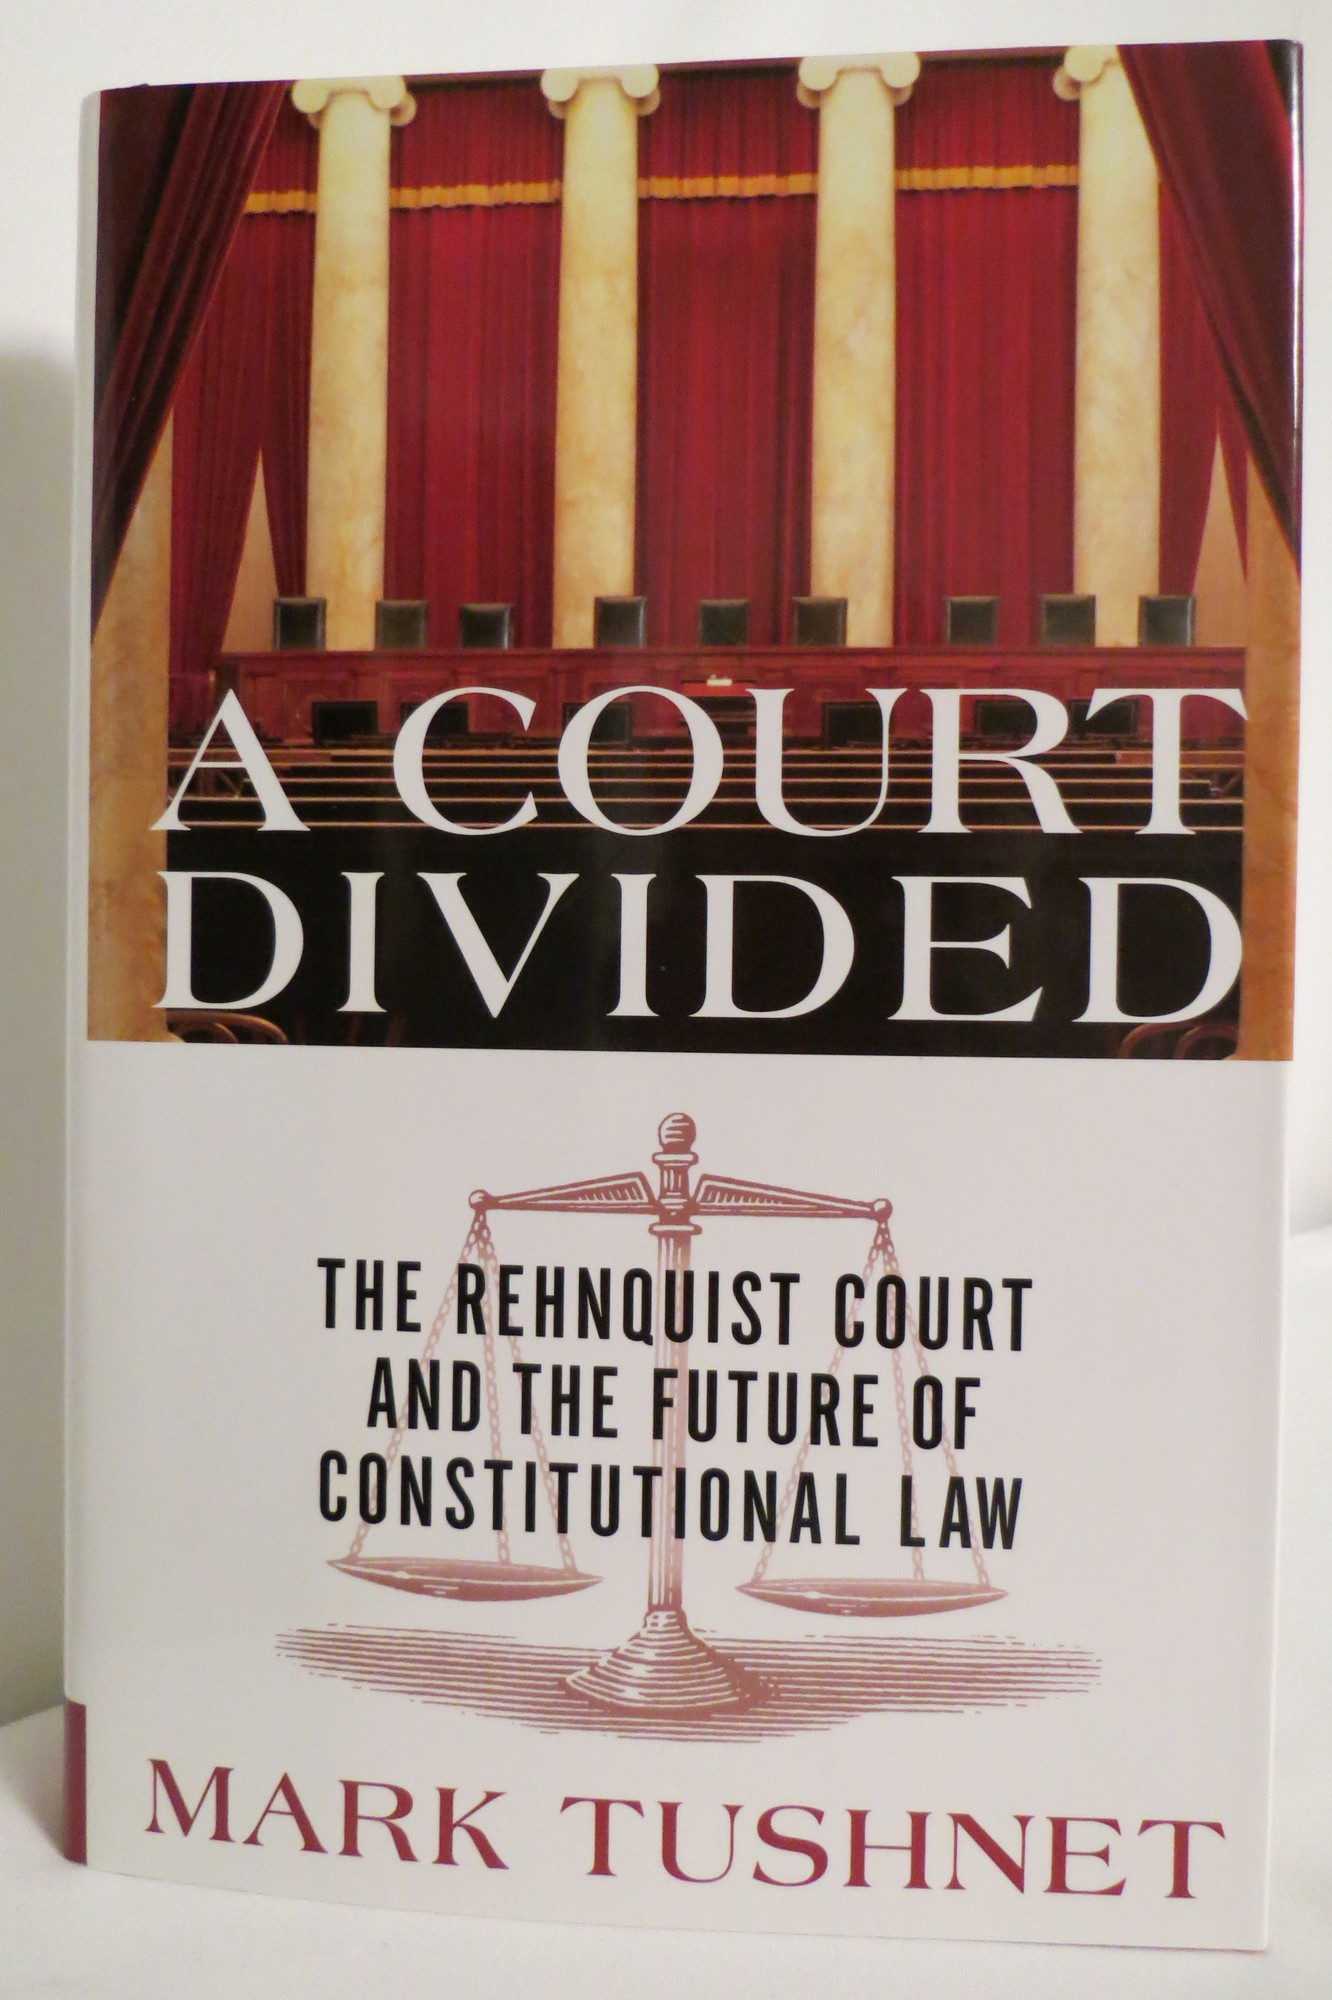 Image for A COURT DIVIDED The Rehnquist Court and the Future of Constitutional Law (DJ protected by a clear, acid-free mylar cover)